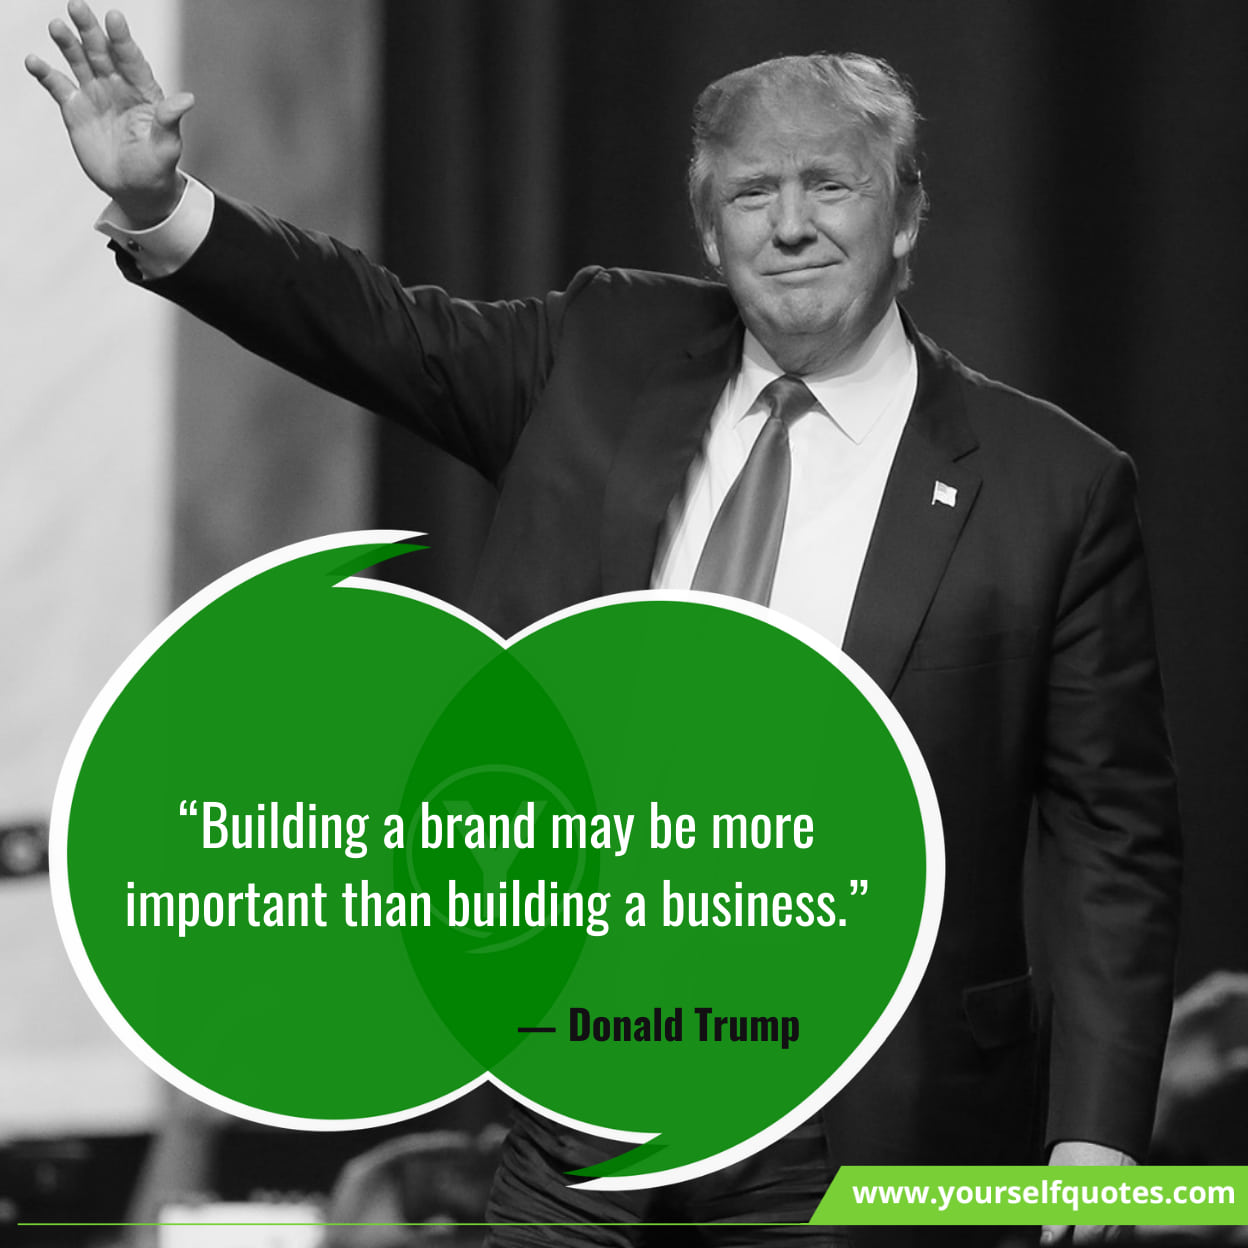 Donald Trump Quotes On Business